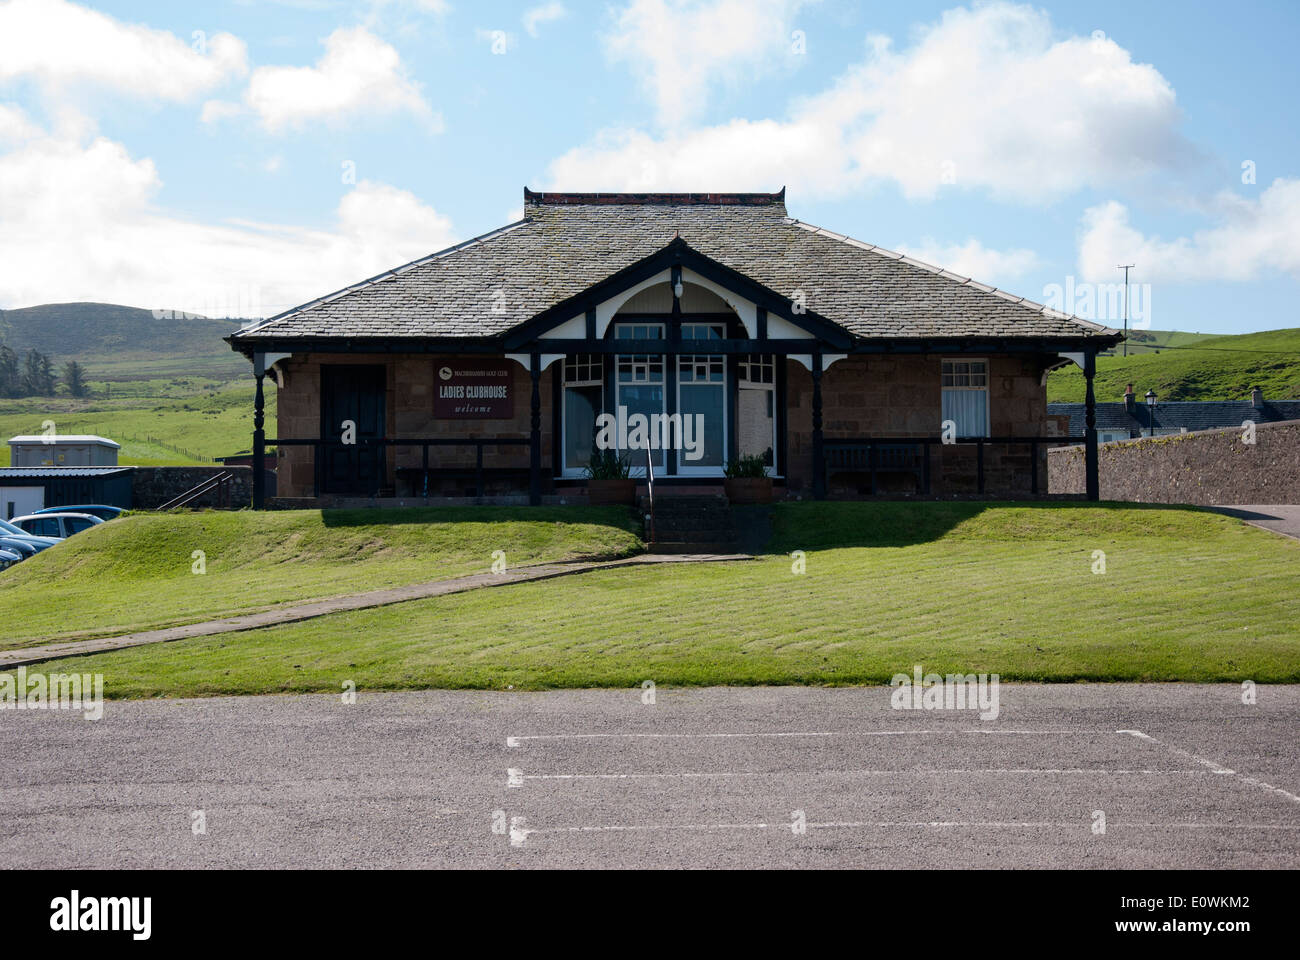 Chers Machrihanish Golf Club Clubhouse Mull of Kintyre en Écosse Banque D'Images